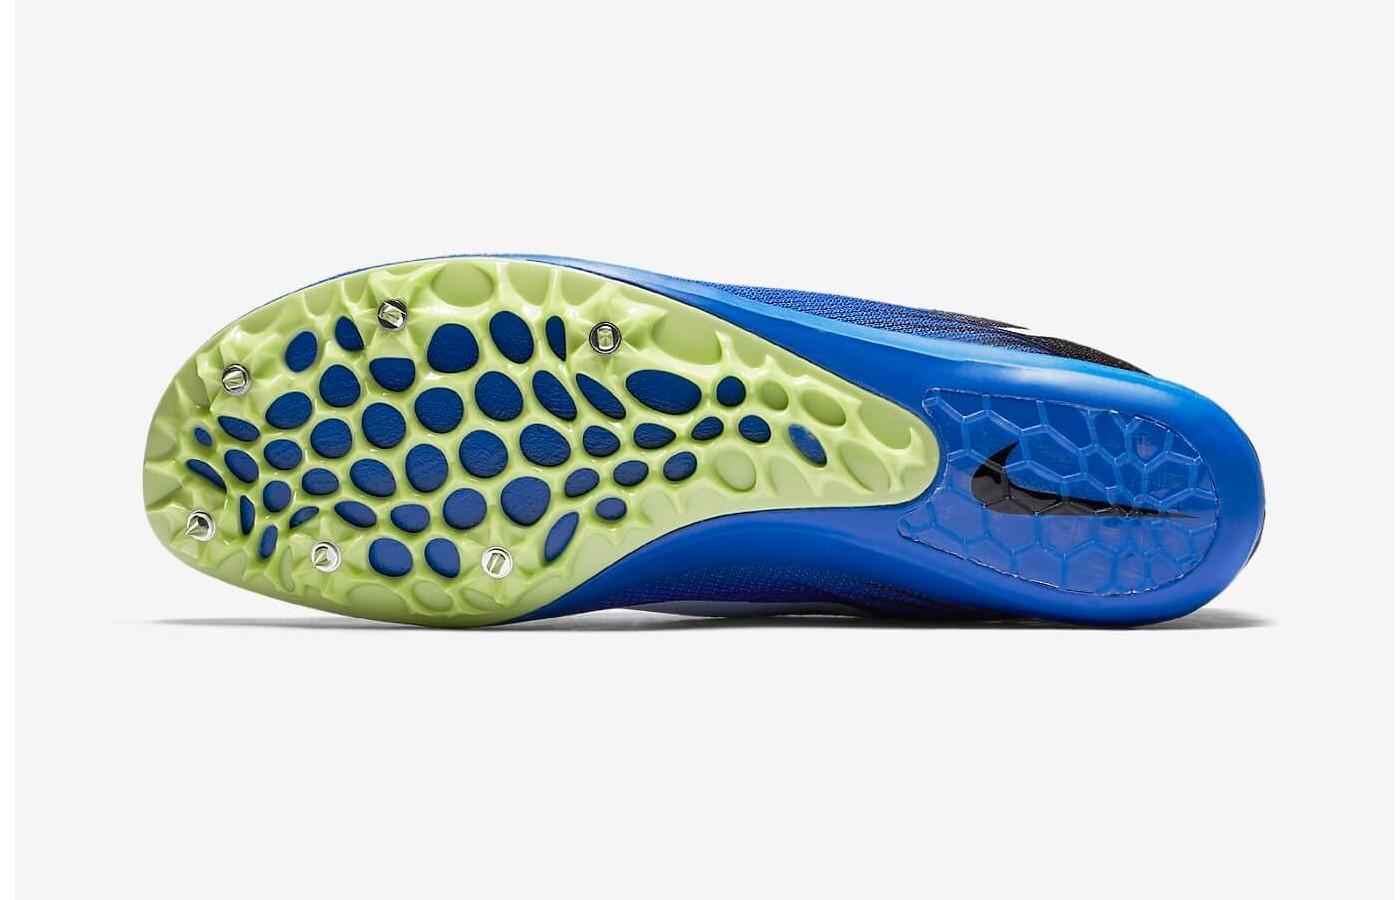 The bizarre design of these shoes' outsole serves an important purpose.